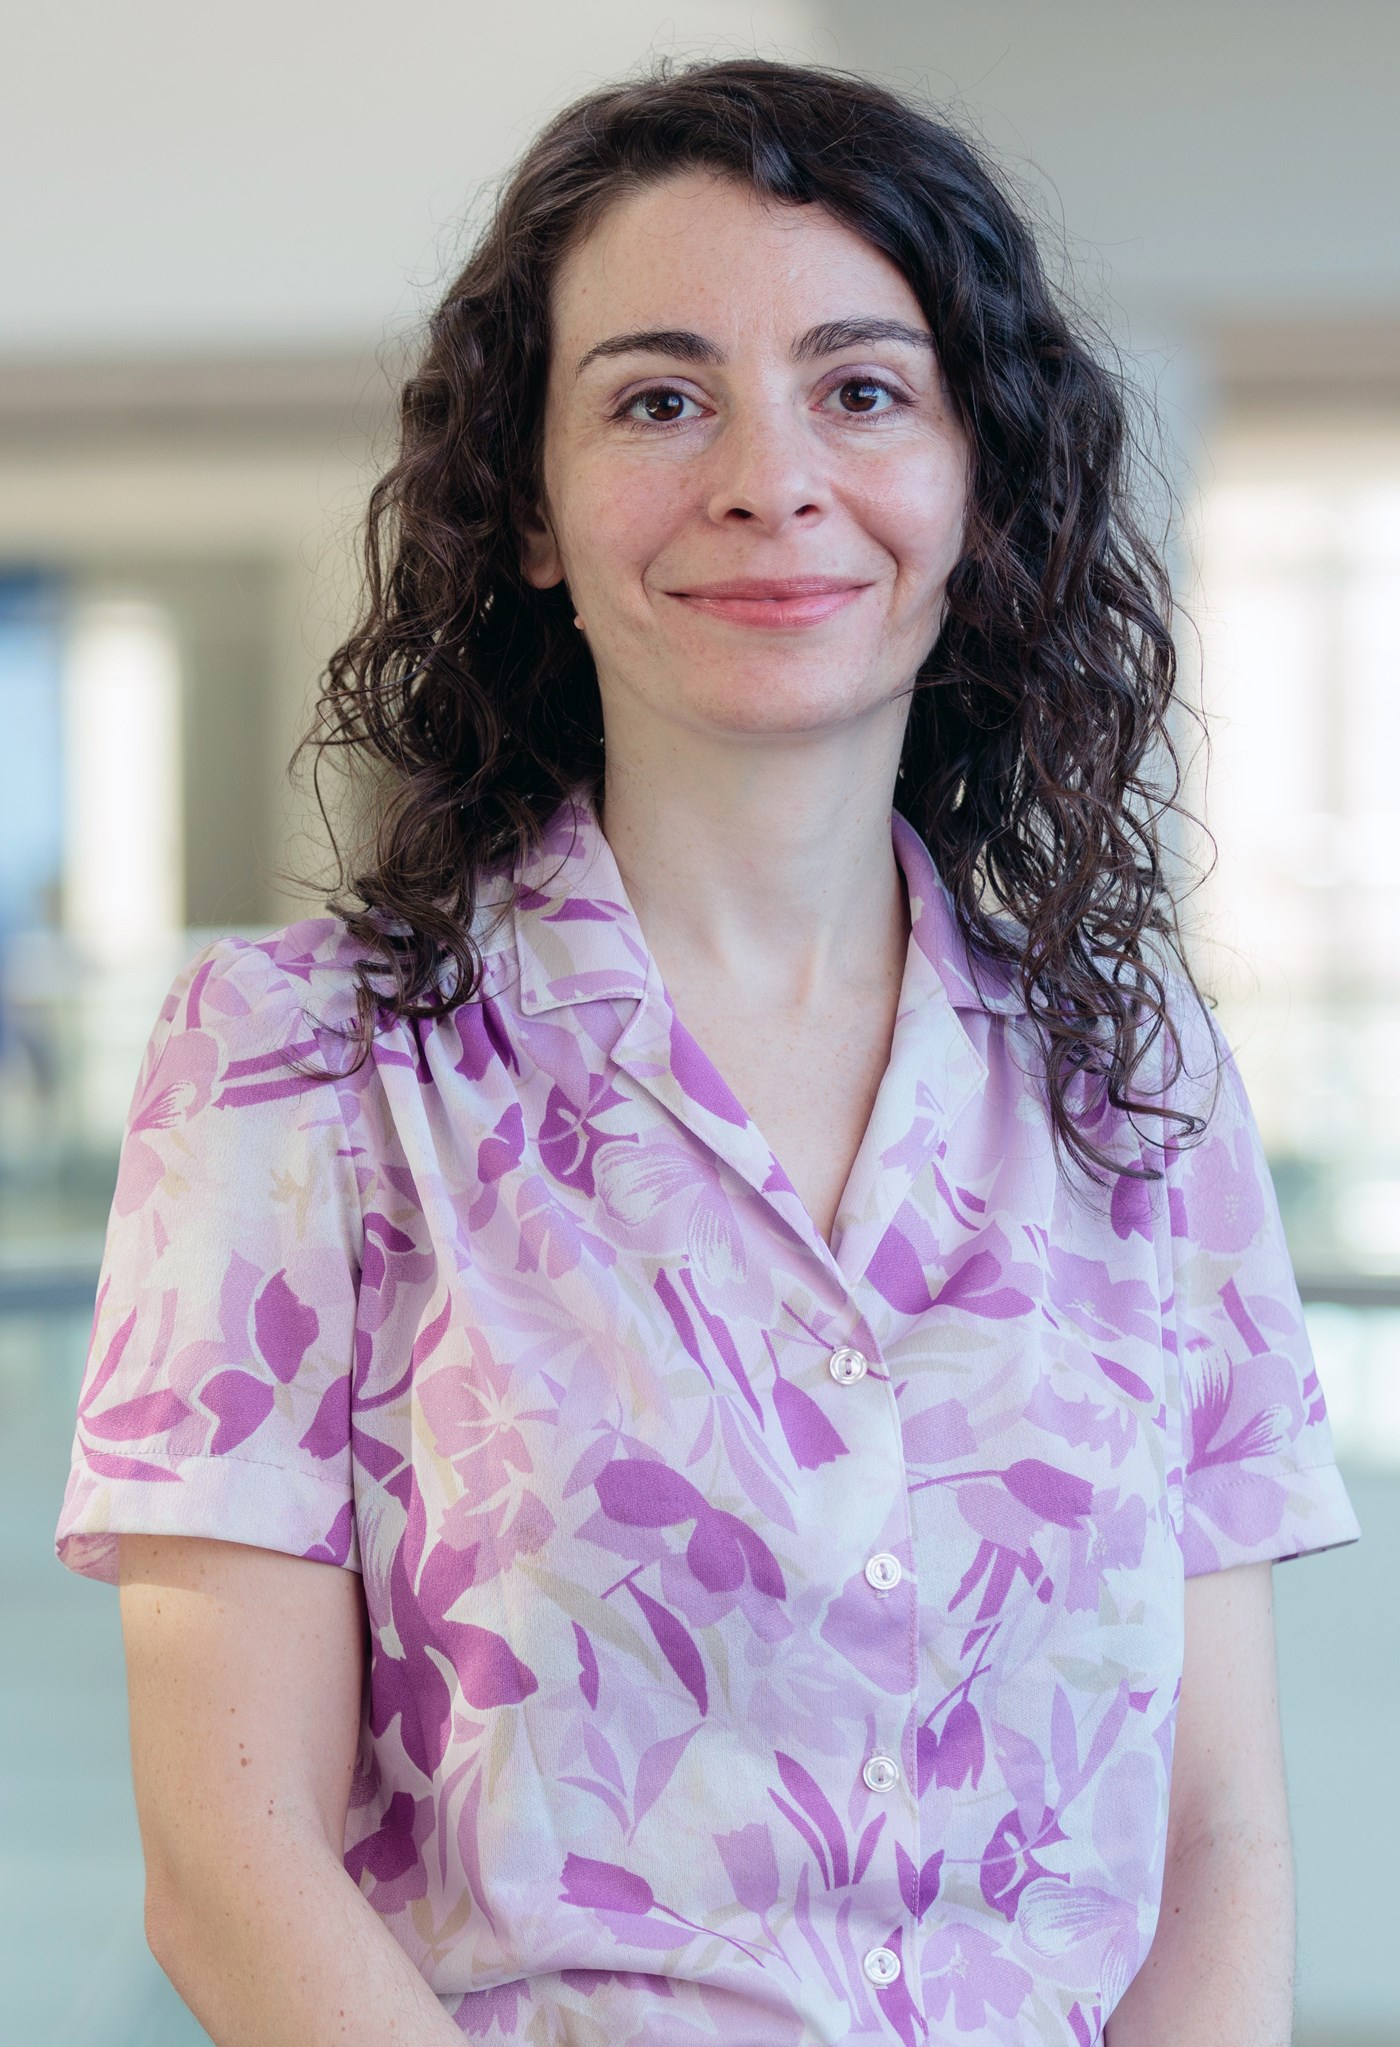 Rachel Melamed is an Assistant Professor in the Biological Sciences Department at UMass Lowell.